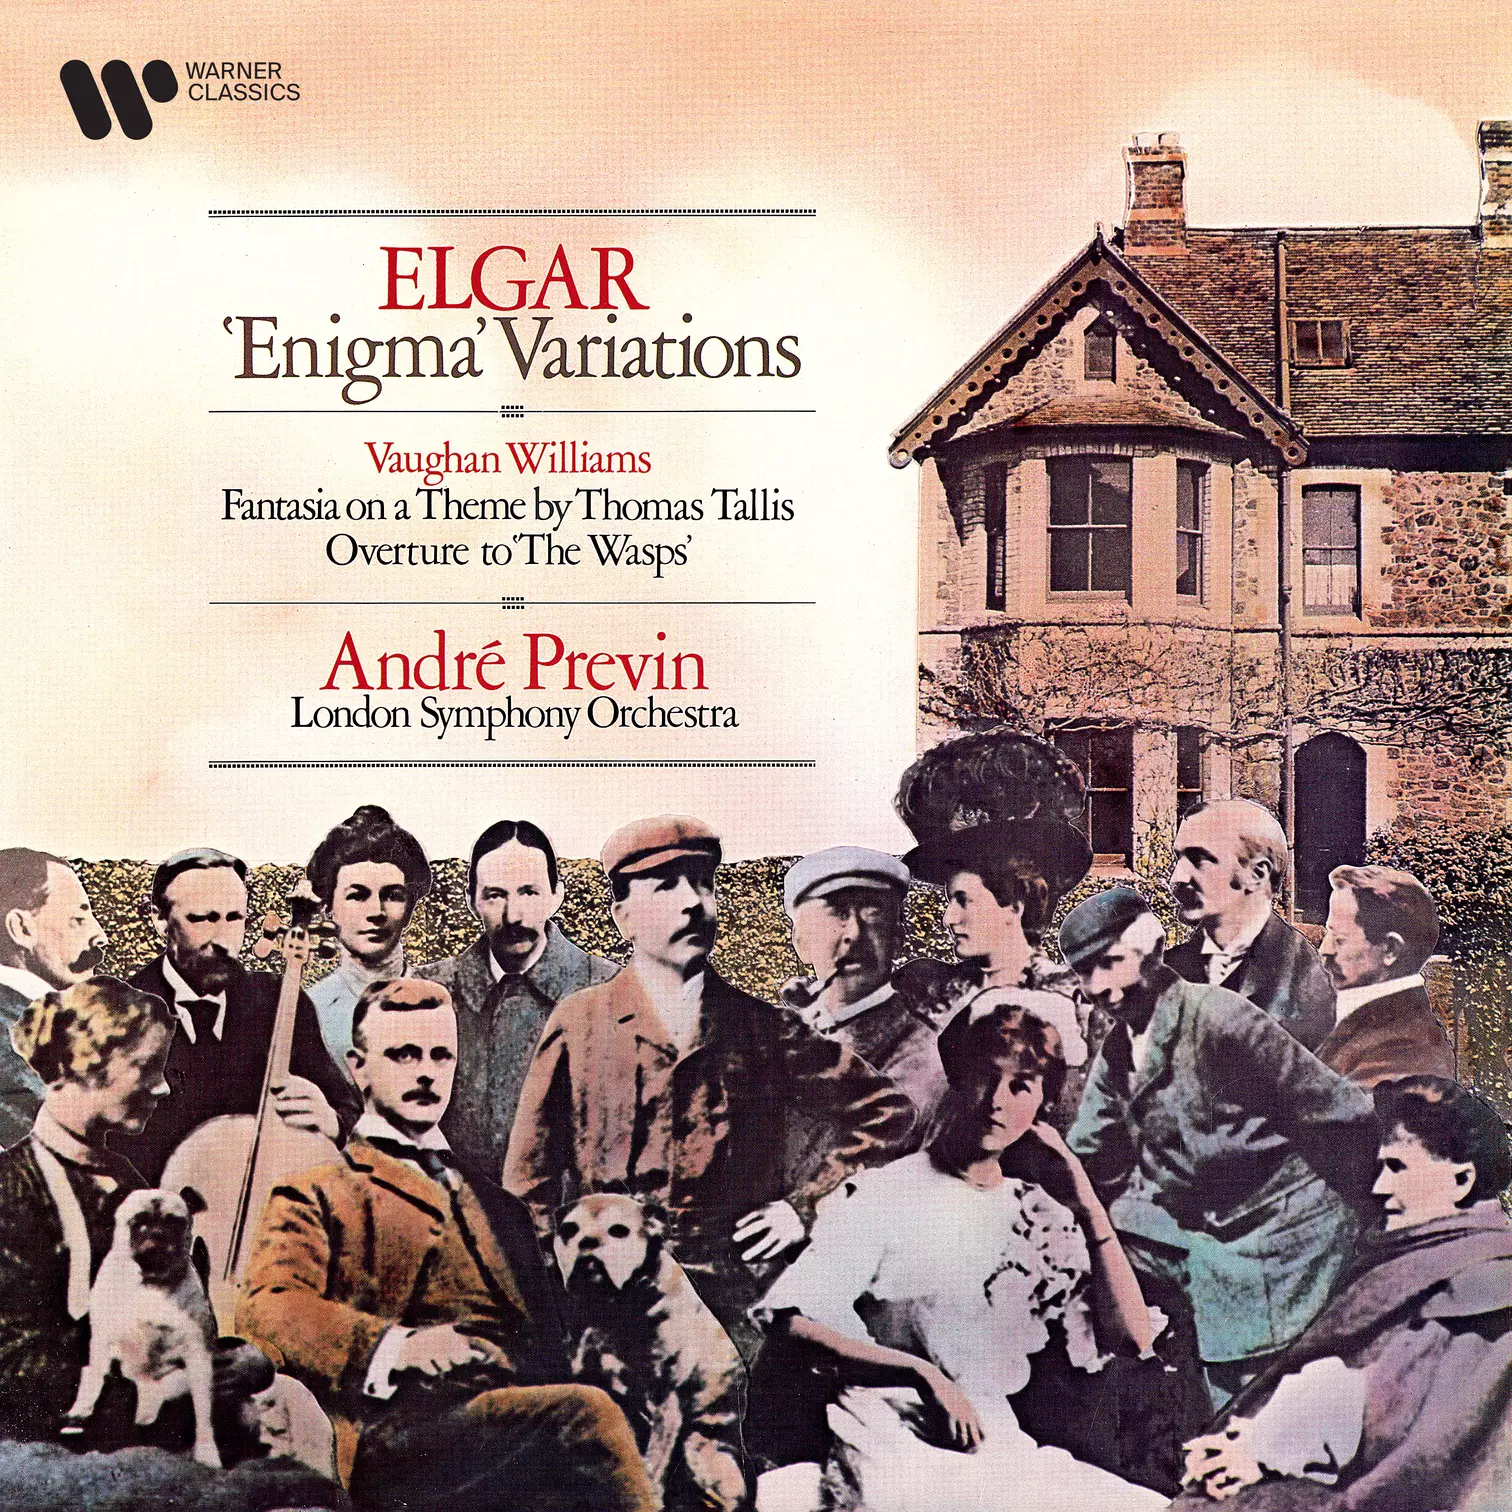 Elgar: Enigma Variations - Vaughan Williams: Tallis Fantasia & Overture to The Wasps